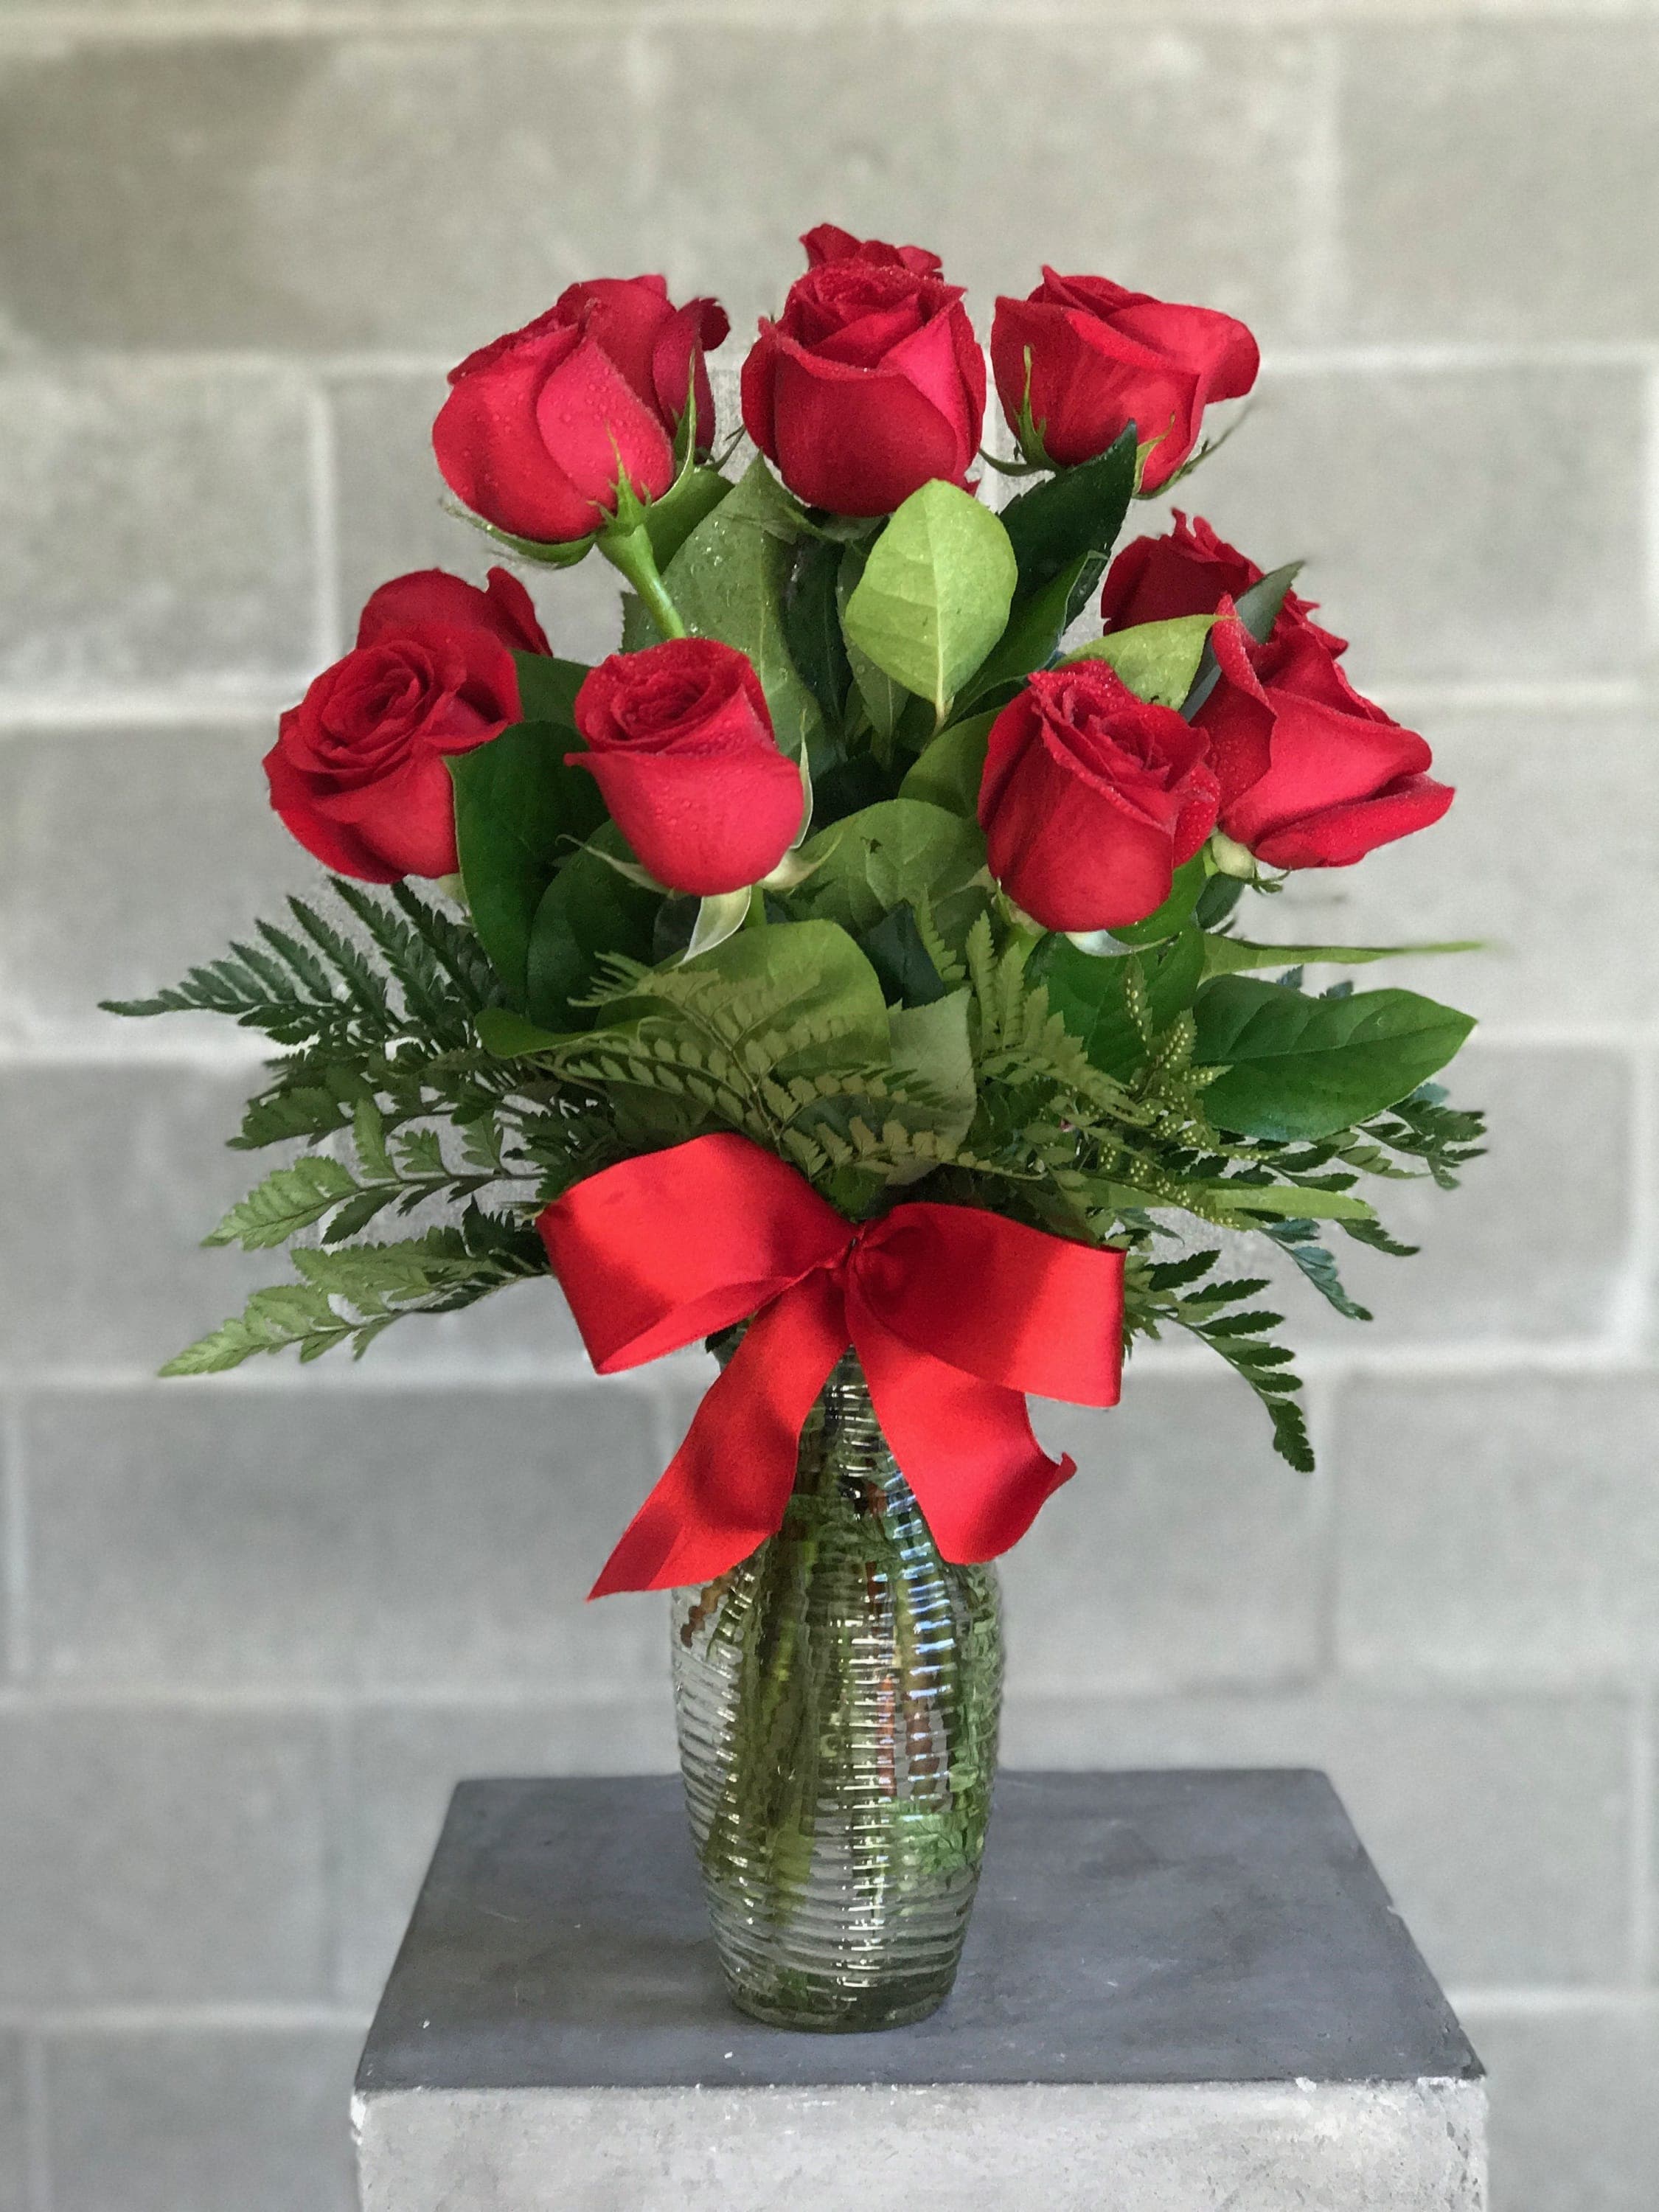 Dozen Rose Special - LIMITED TIME OFFER     We are offering gorgeous red roses for an amazing price!      Order yours today before it's too late!      What's Included?  One Dozen Red Roses Glass Vase Red Ribbon Seasonal Greens